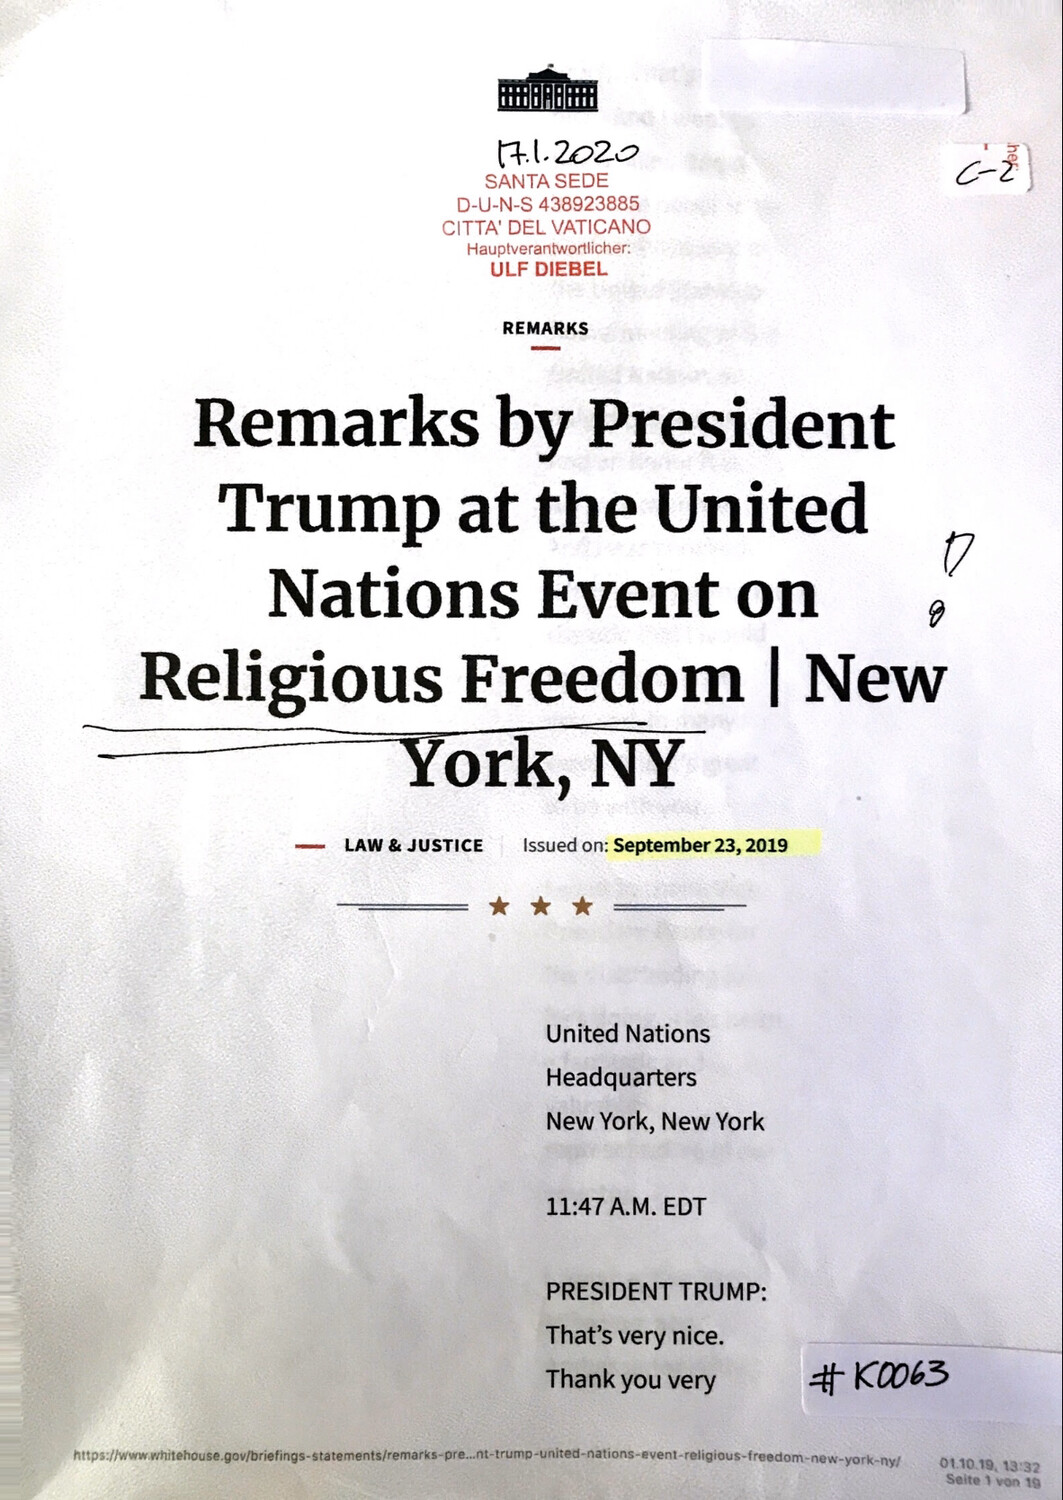 #K0063 l Remarks by President Trump at the United Nations Event on Religious Freedom l New York,NY - The White House